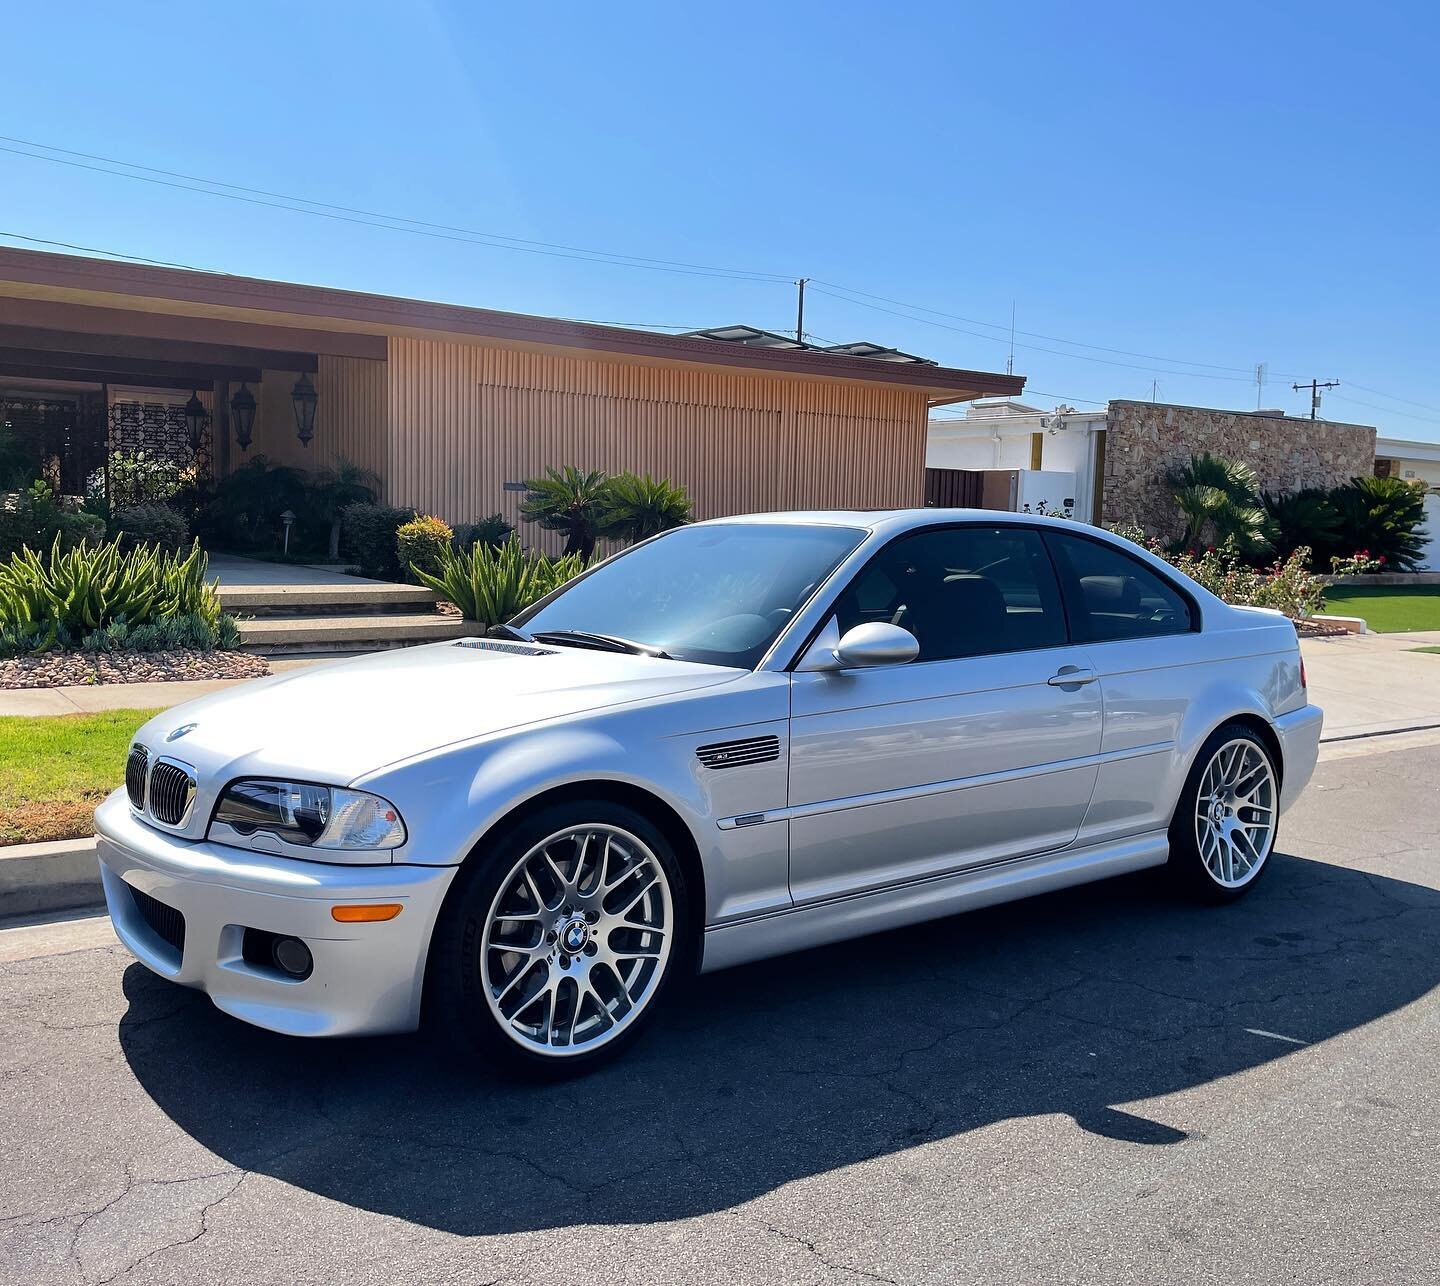 Best part about being too busy to drive each of my cars more than once every few weeks is that I get to re-discover how great the M3 is over and over!